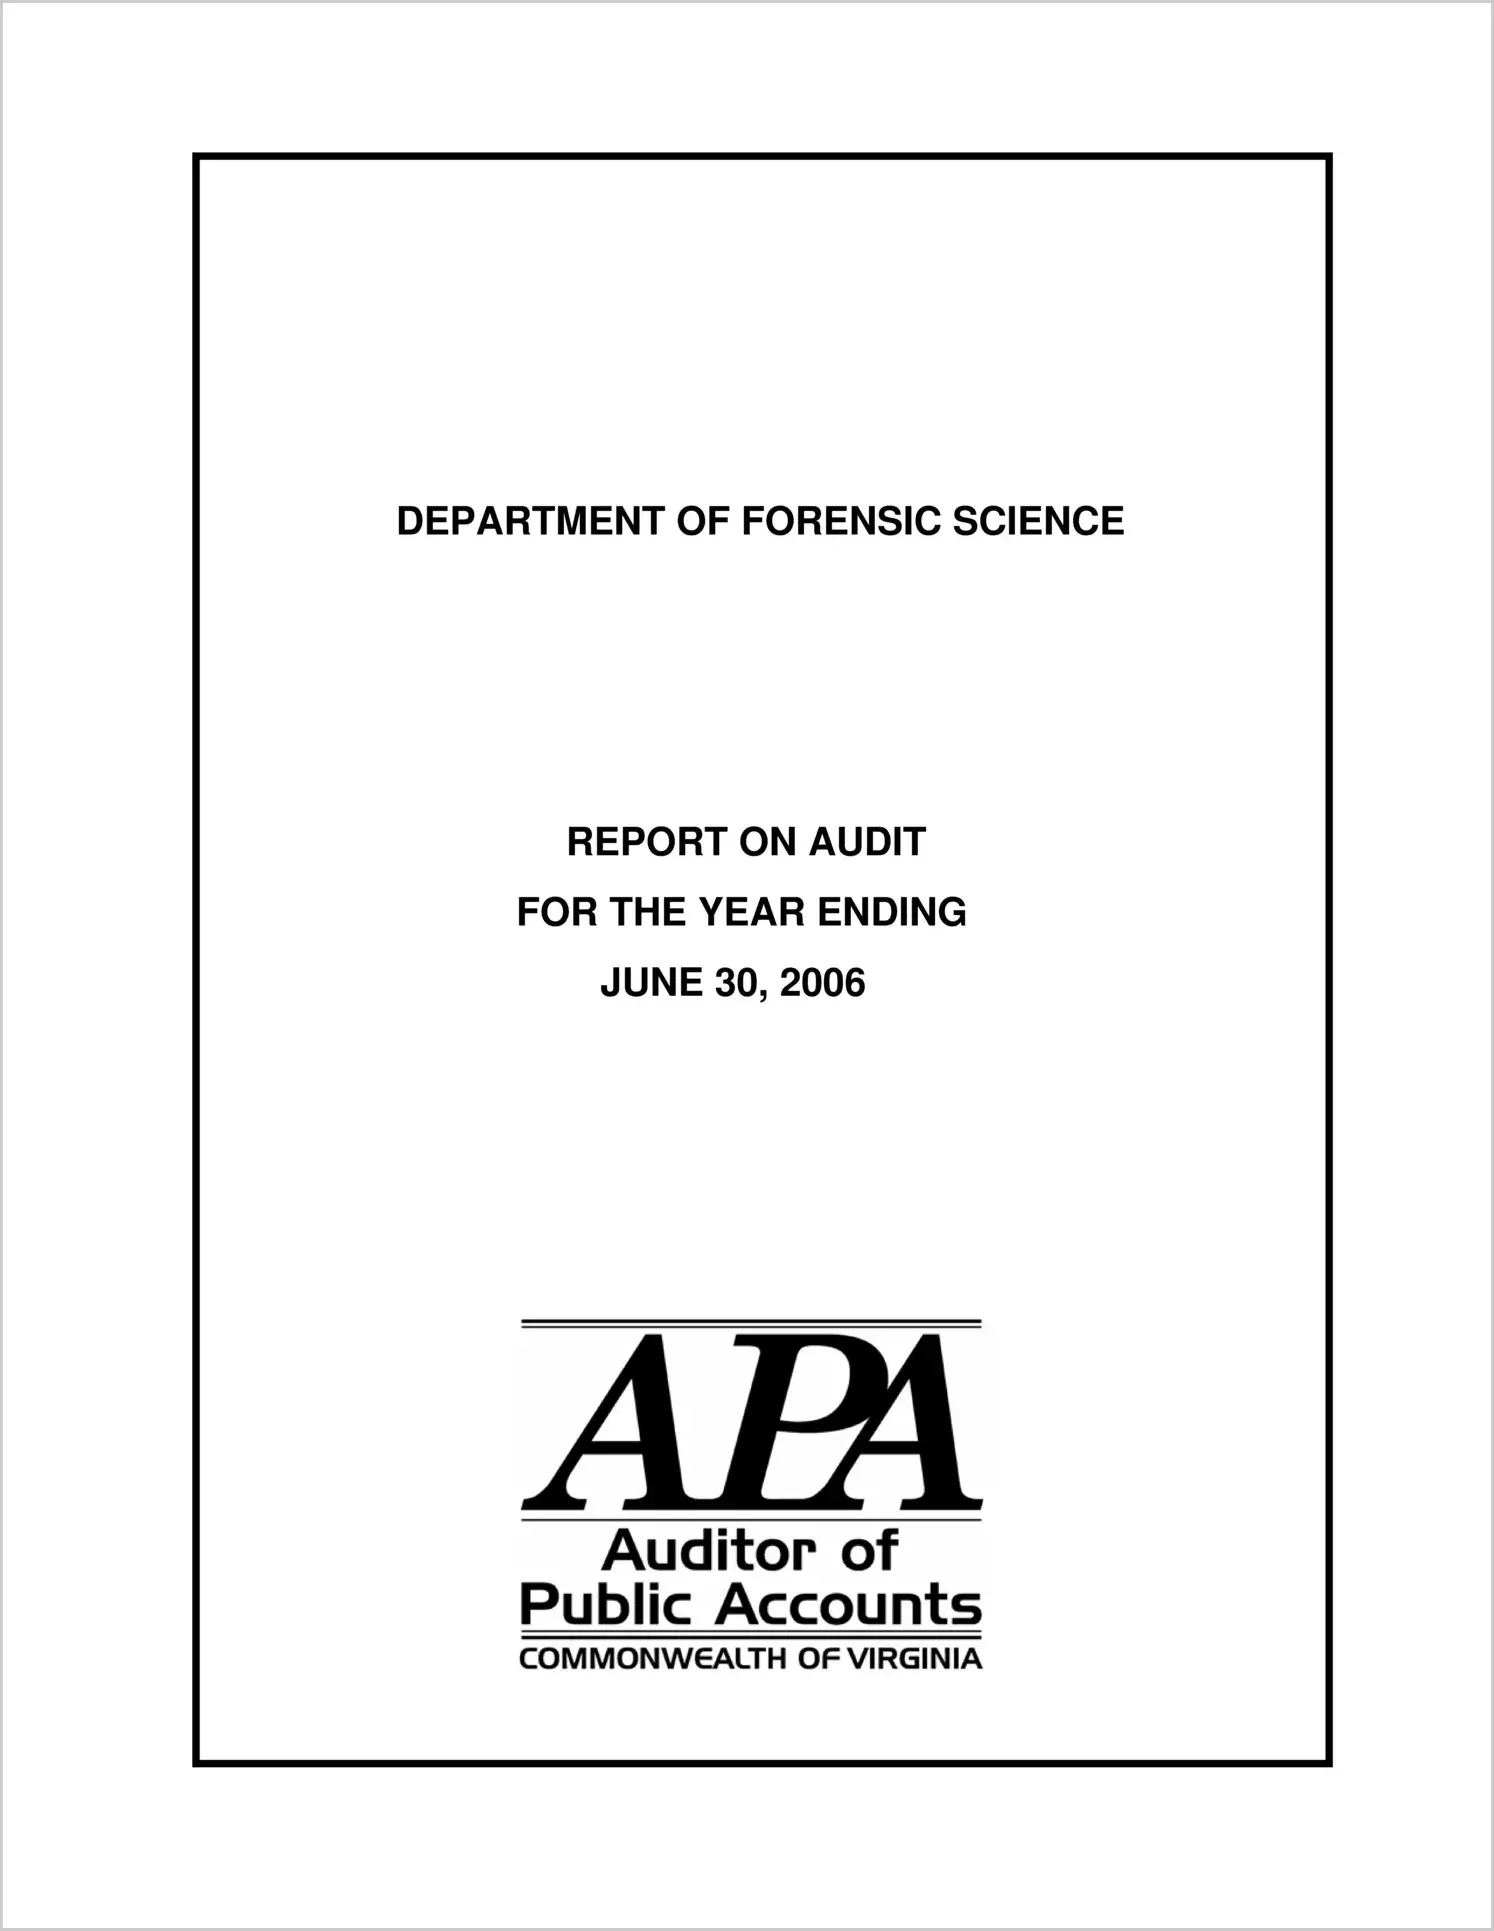 Department of Forensic Science Report on Audit as of July 31, 2006